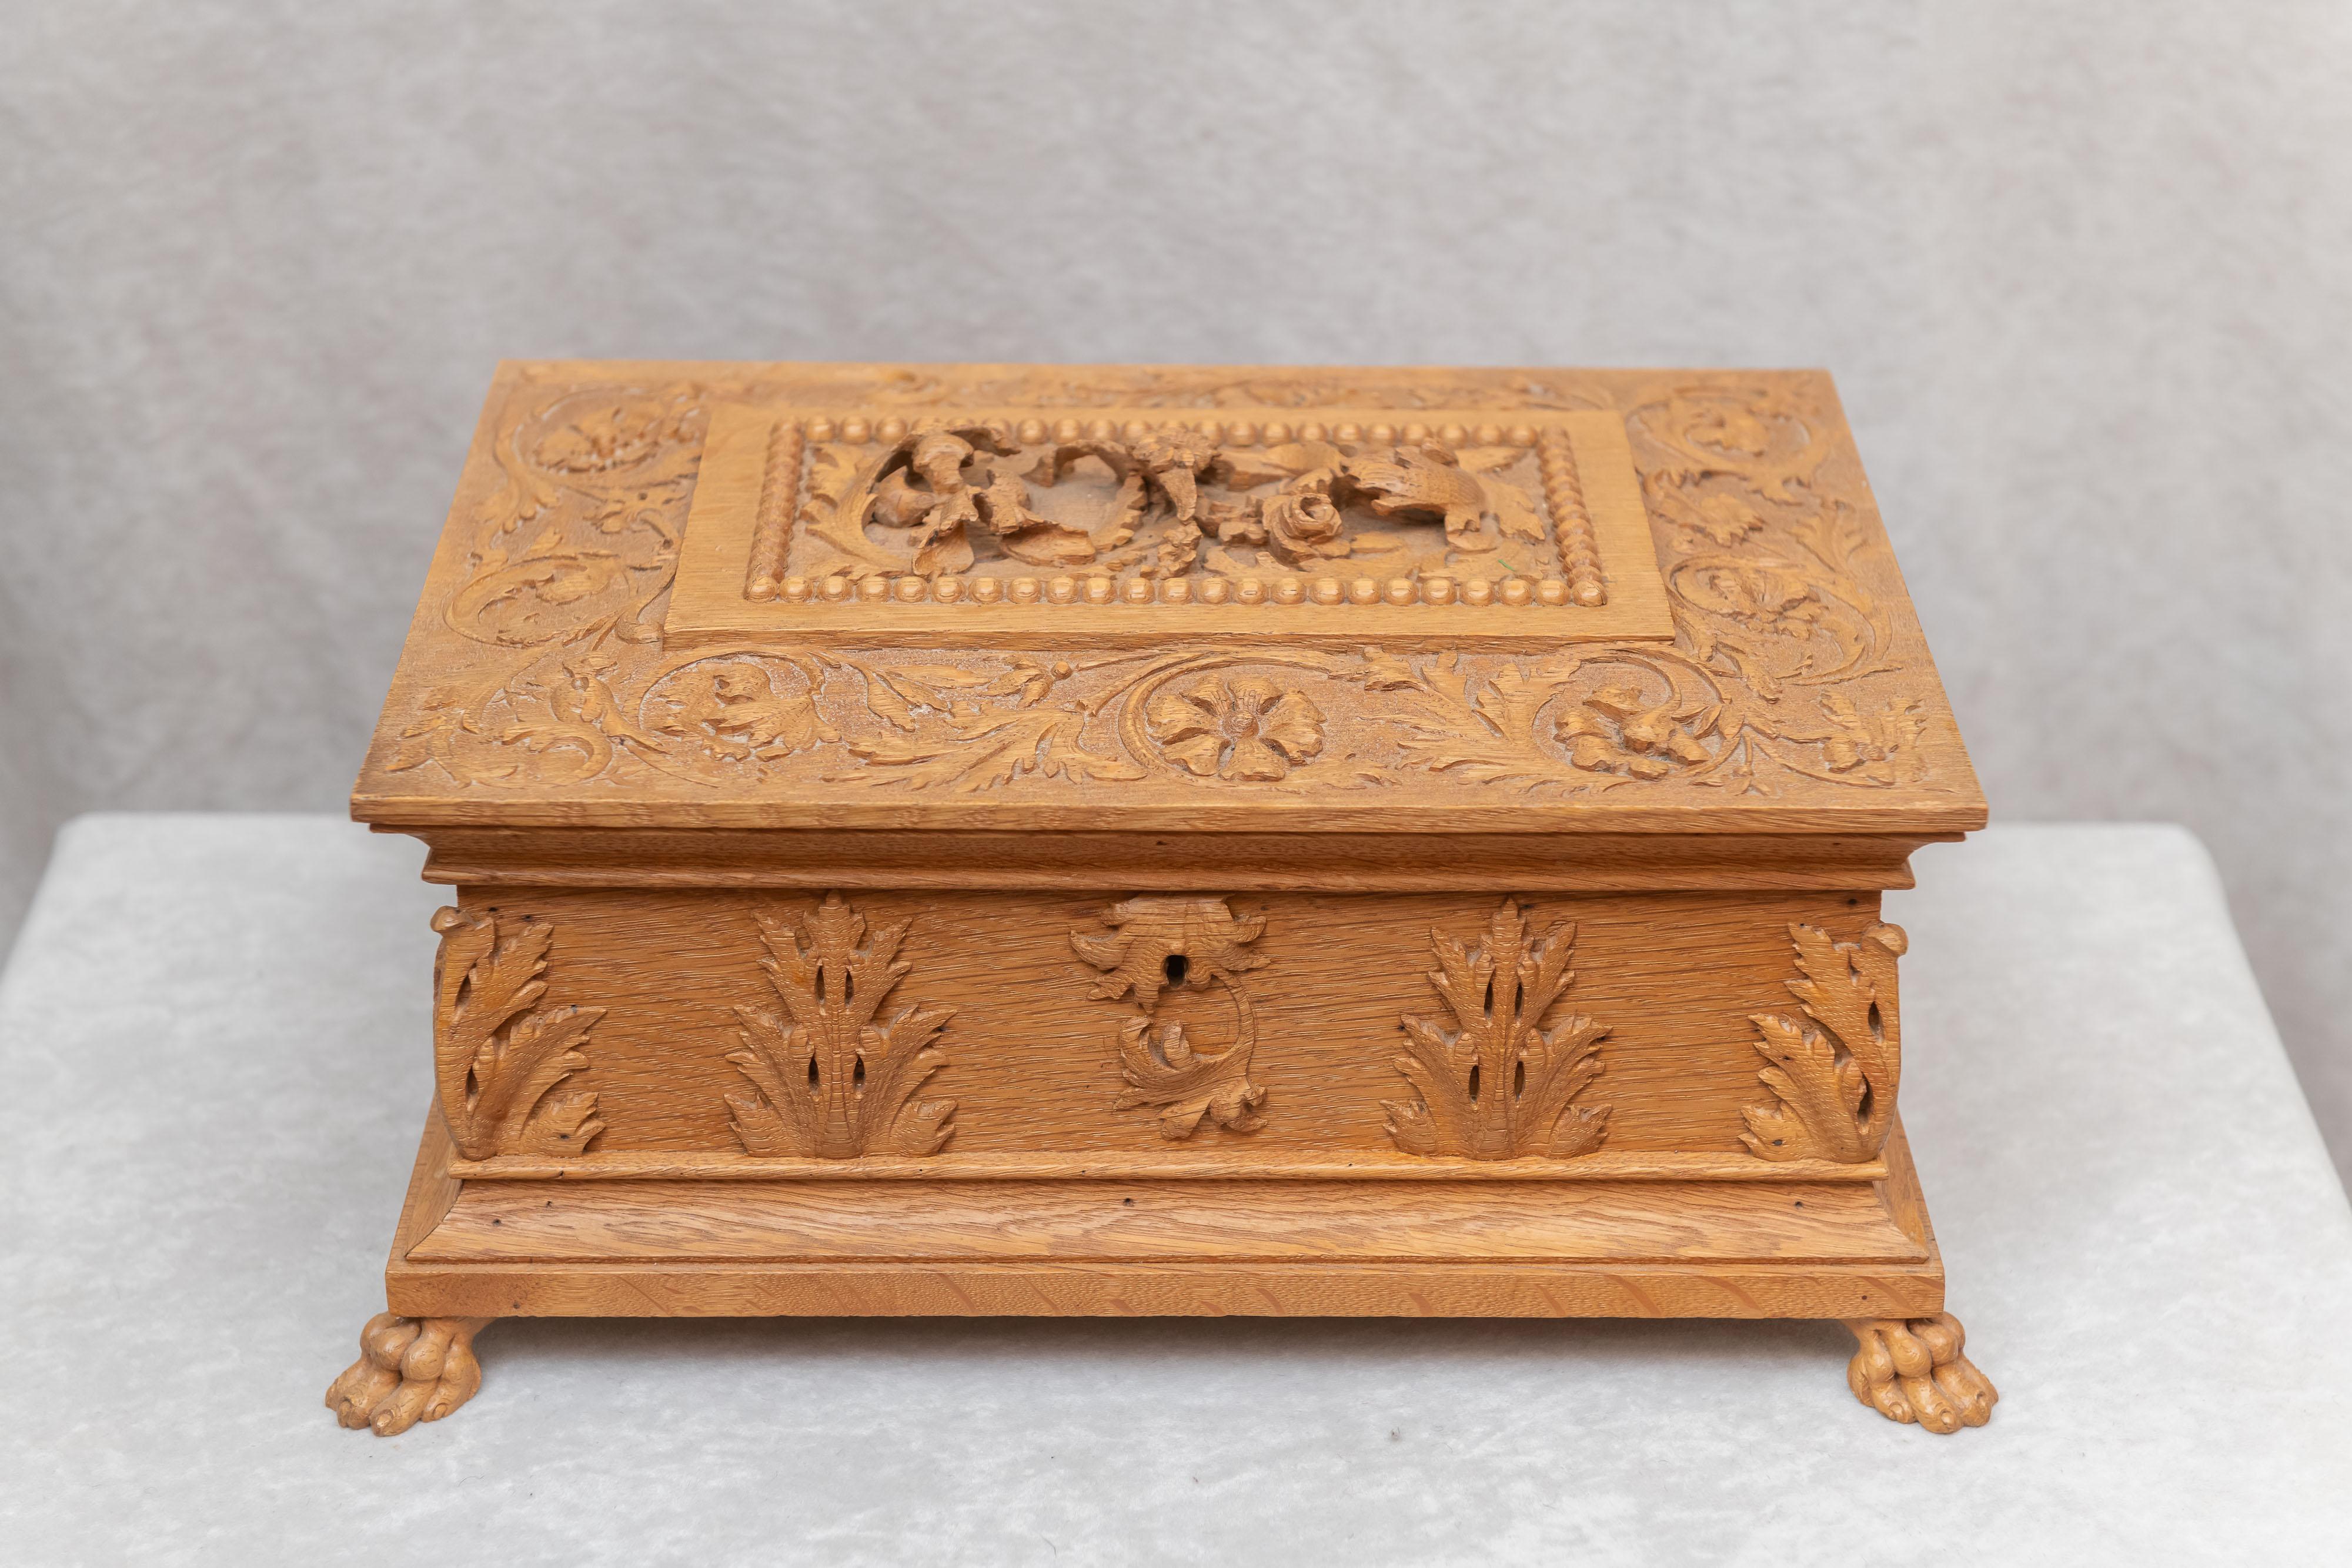 Calling this an oak box is like calling a Rolls Royce a car. I have sold and seen many oak boxes in my over 40 years, but none of this grand order. While it is heavily carved, it is done so well that it still maintains it's dignity. Carved by a